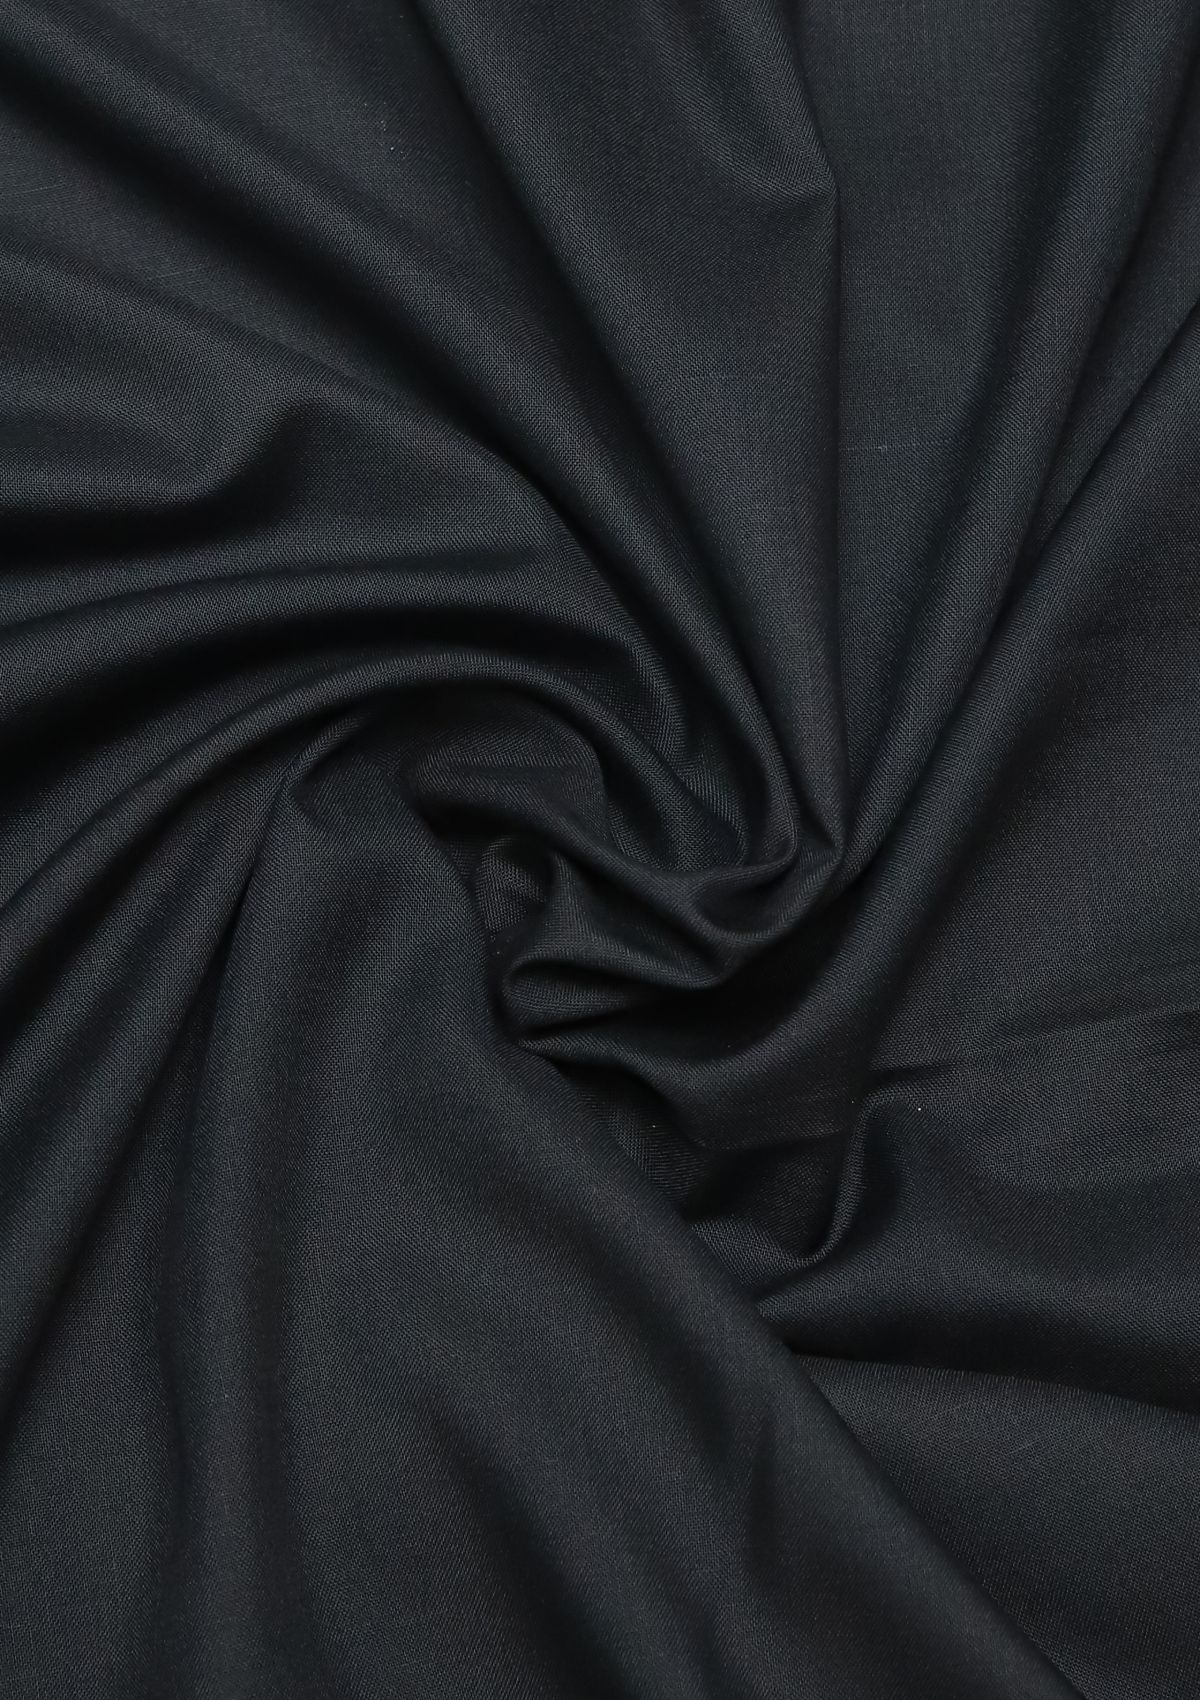 Saloon Wash N Wear Color (Black) available at Saleem Fabrics Traditions